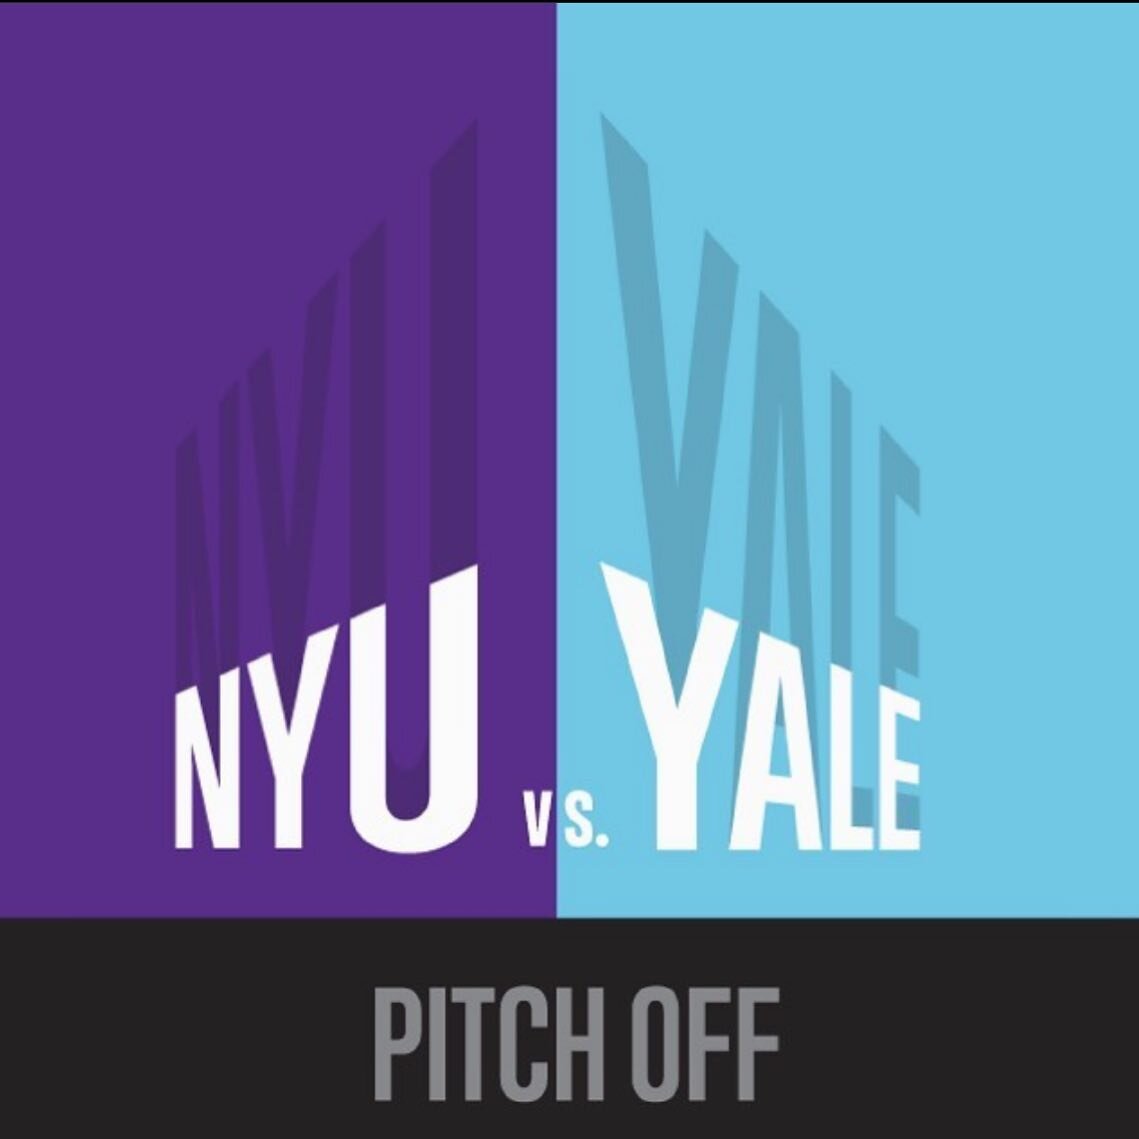 Save the date for Thursday, July 15th🎉OnePointFive will be representing @tsaicity at the NYU vs Yale Pitch Off along with some phenomenal ventures. Register through the link in our bio!